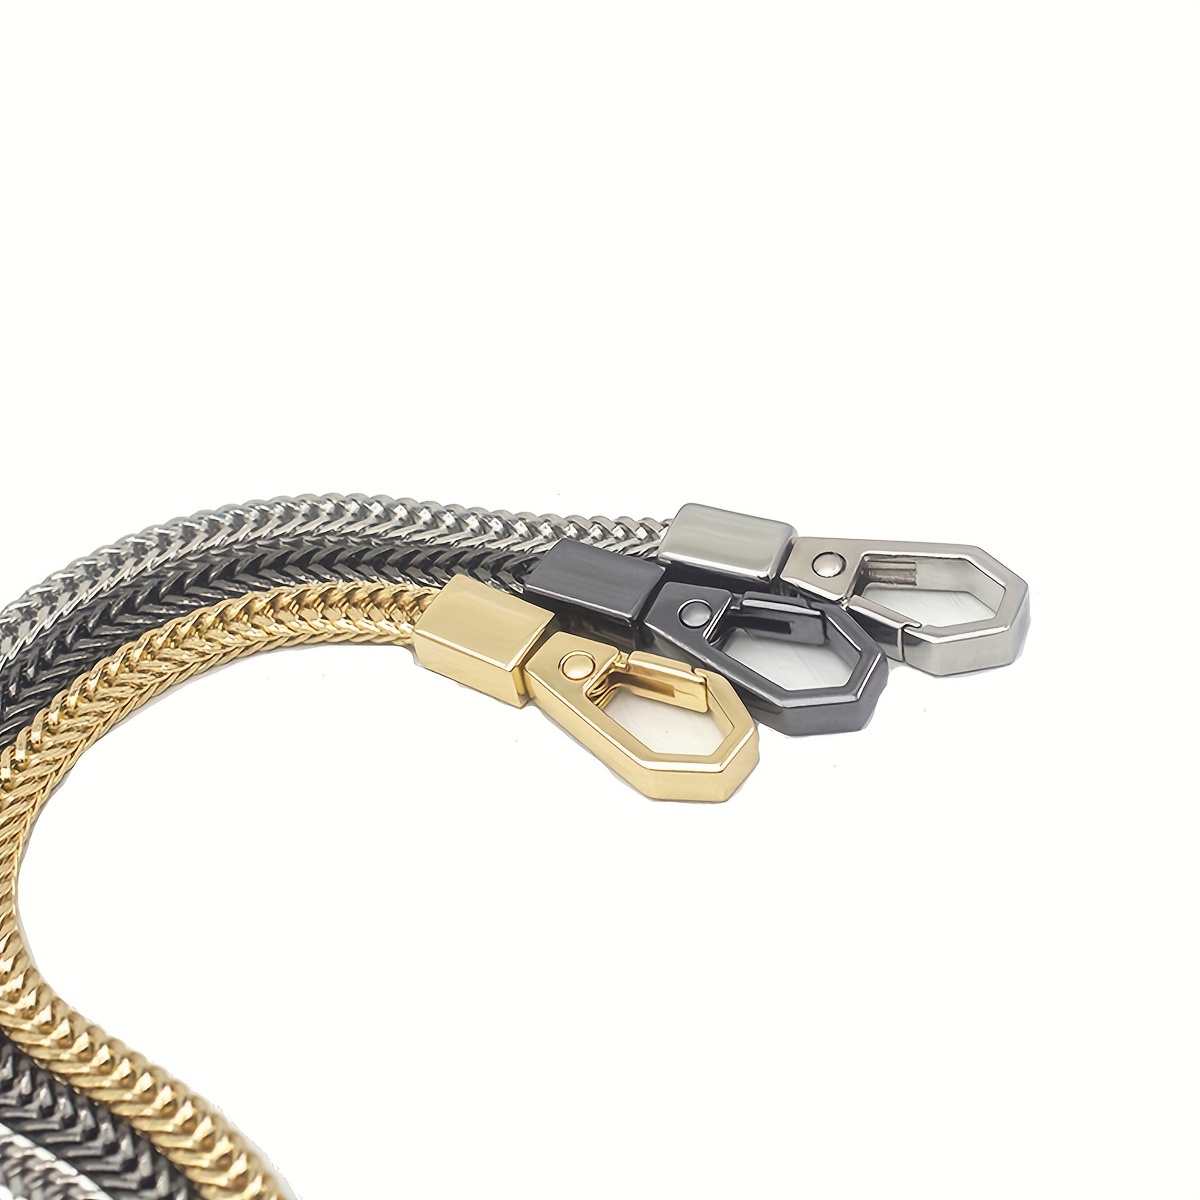 Replacement Chain Strap for LV Bag